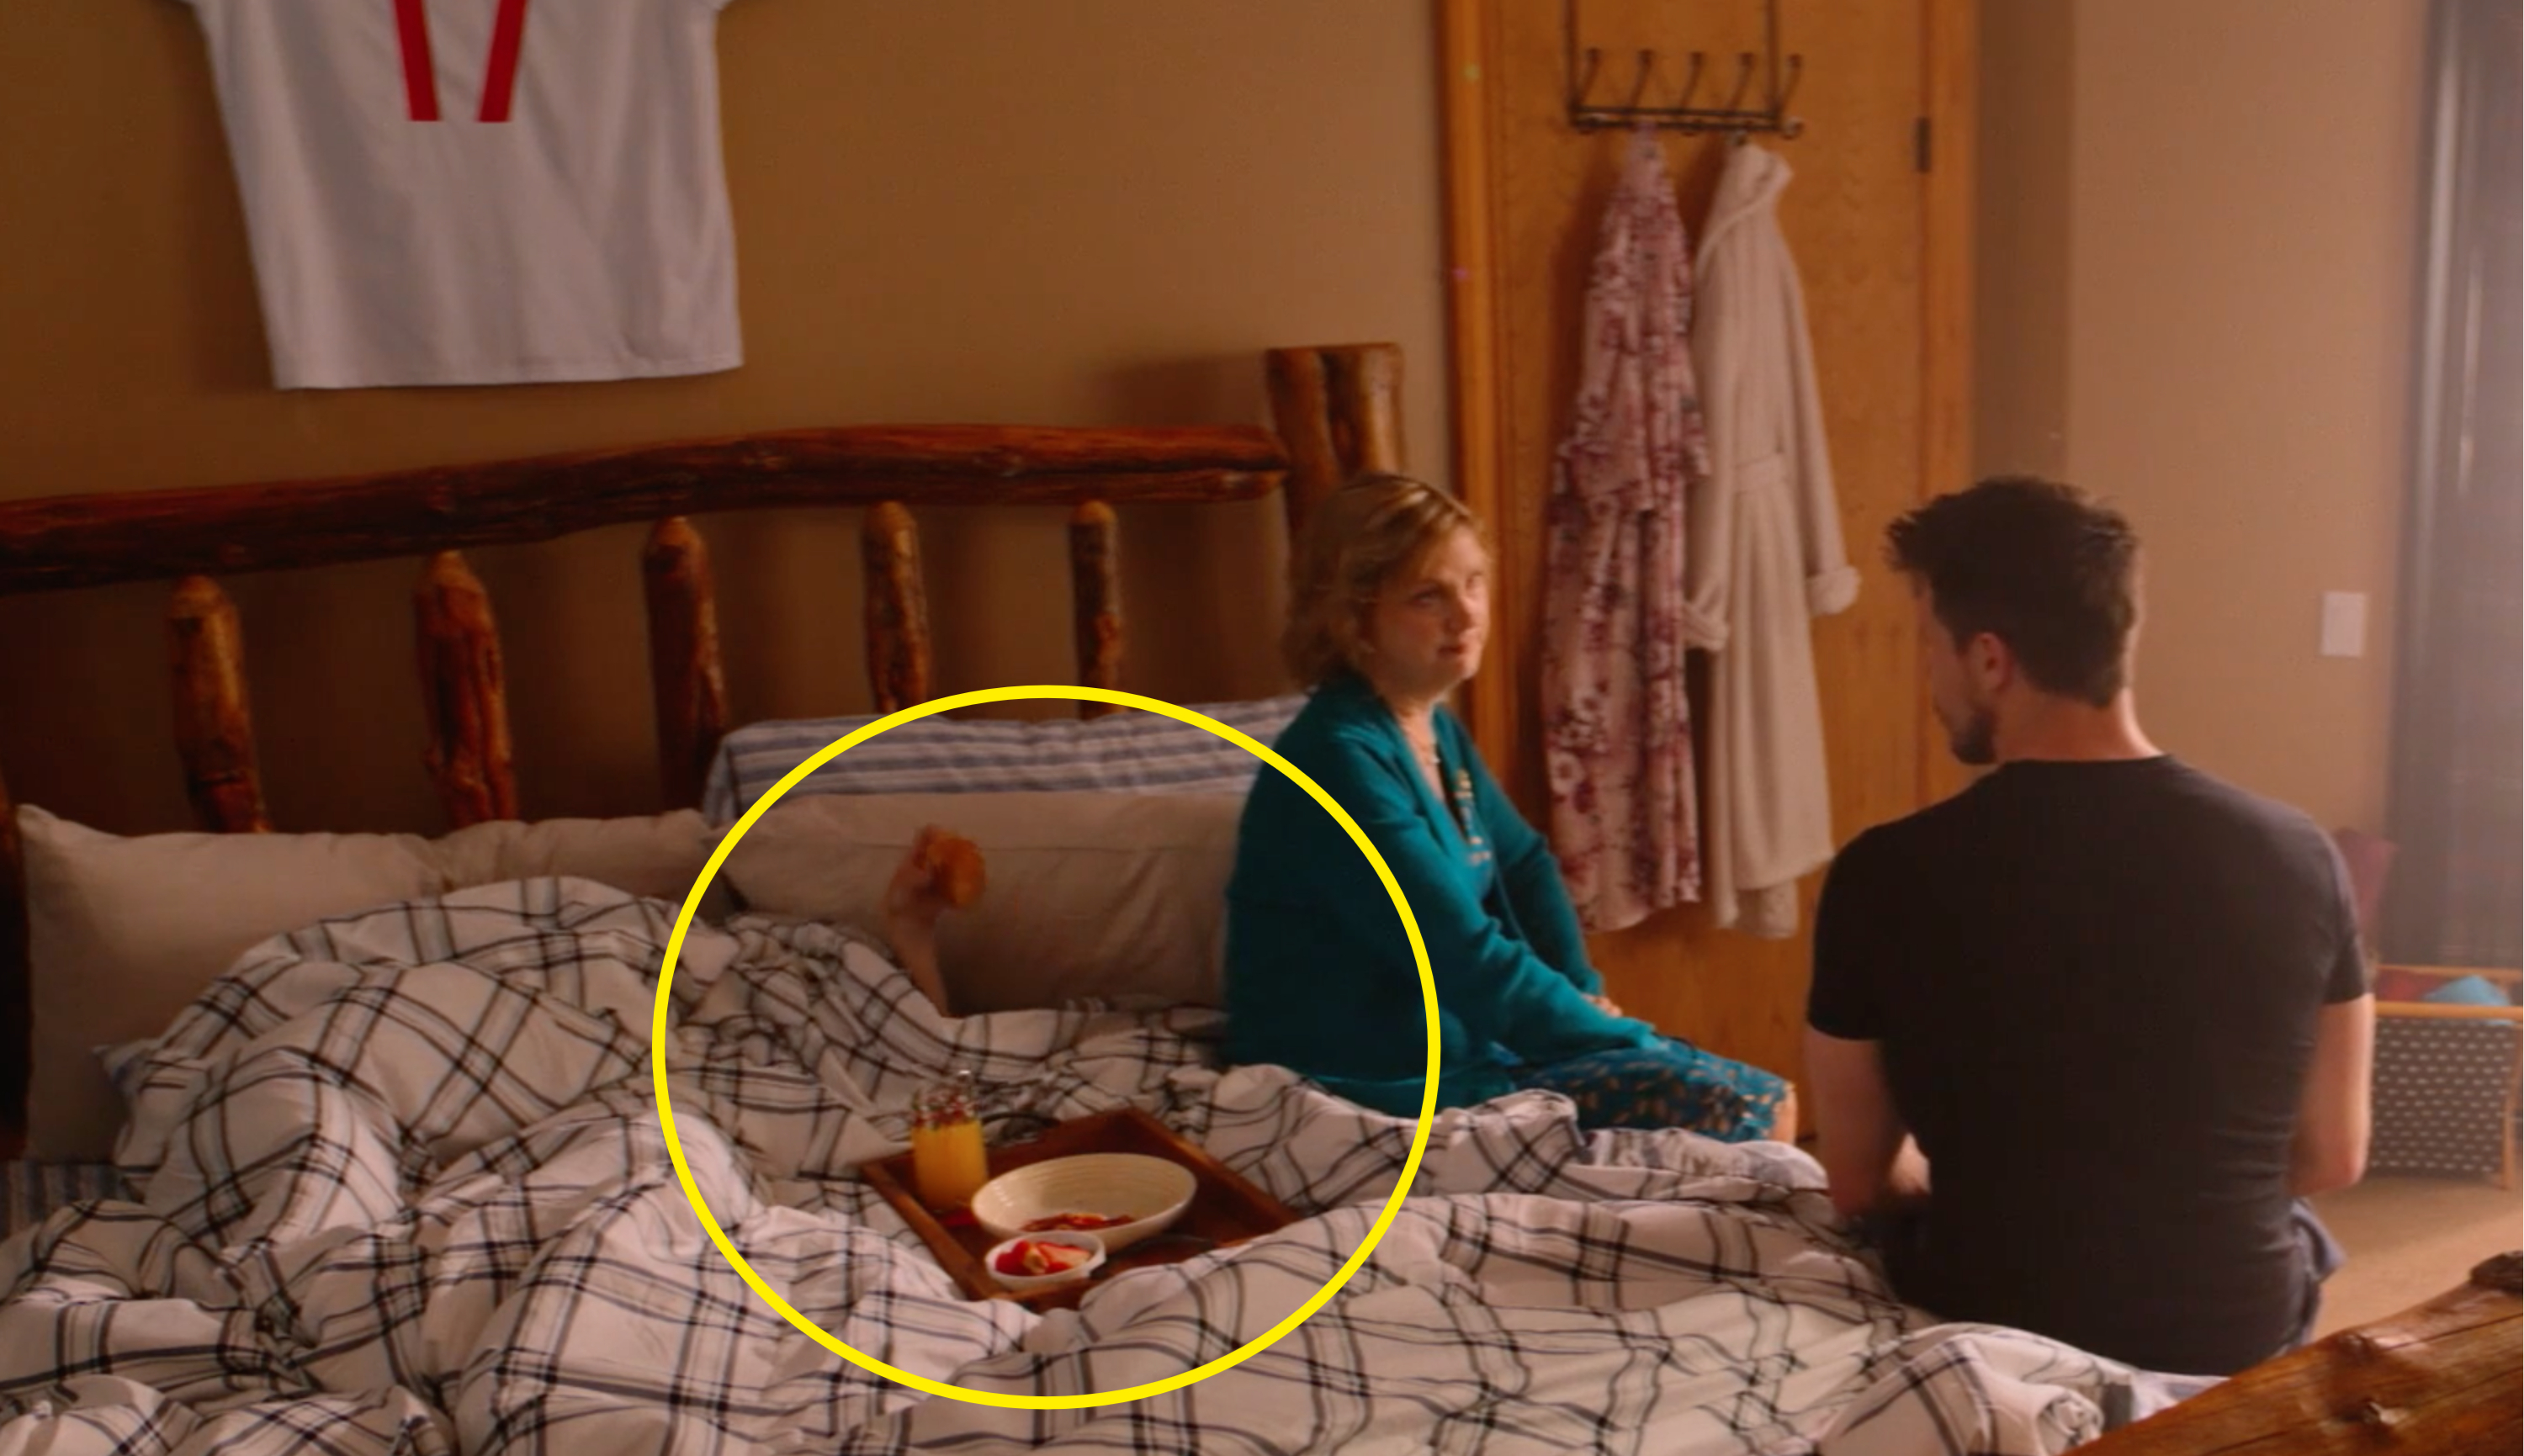 scene of person under bed sneaking a pastry while mother talks to son on bed